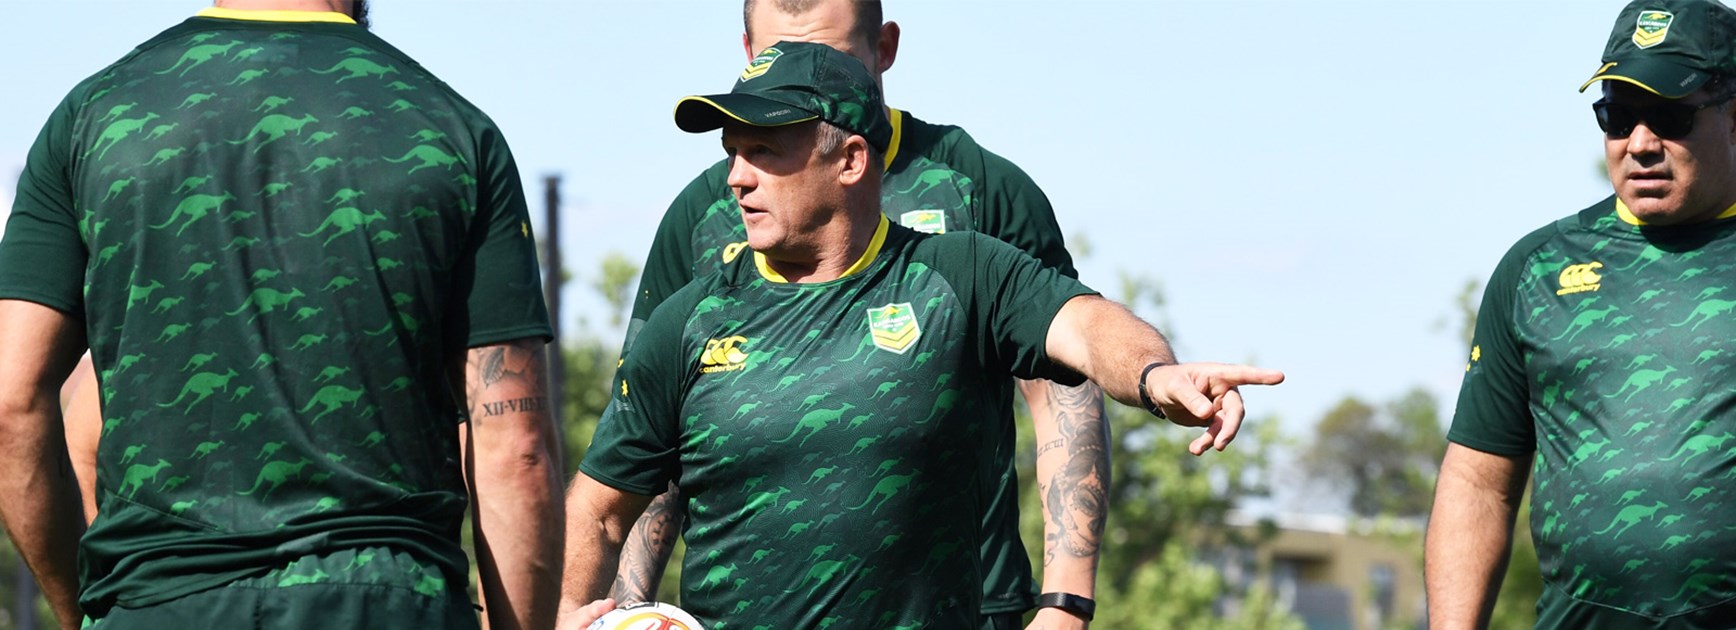 Trevor Gillmeister at Kangaroos training ahead of the World Cup final.